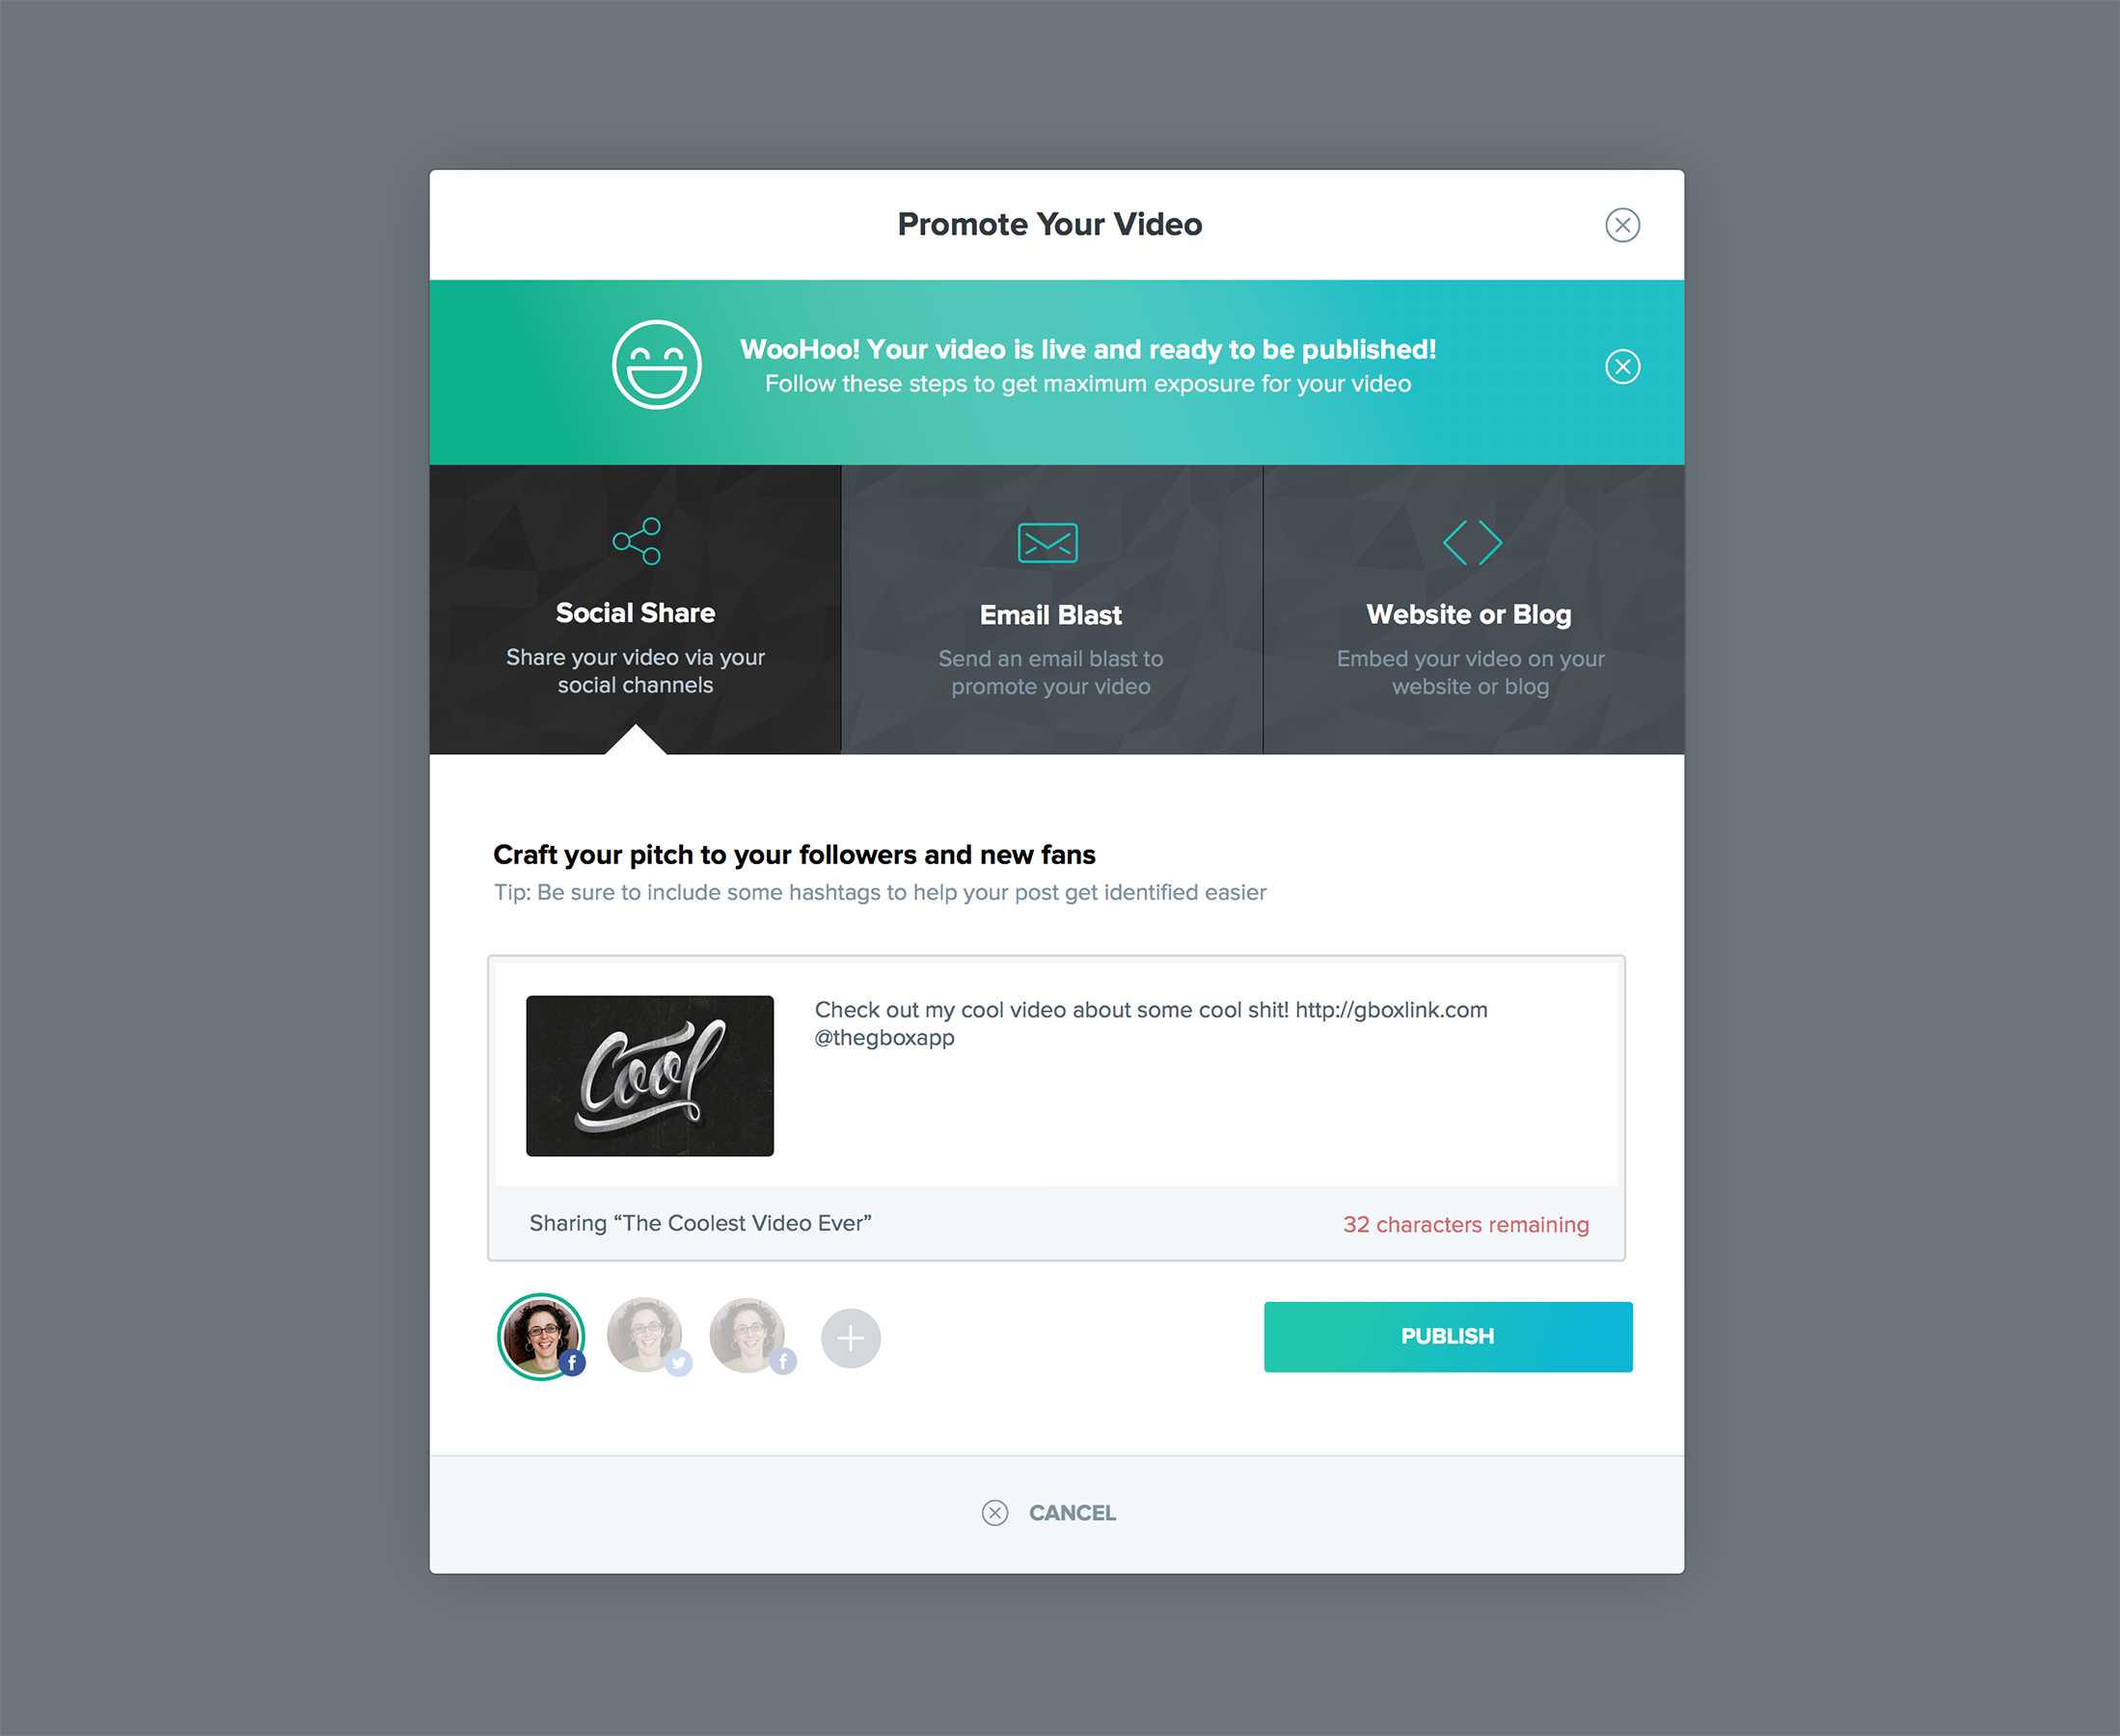 Promote Your Video by Mike Valera for Gbox on Dribbble